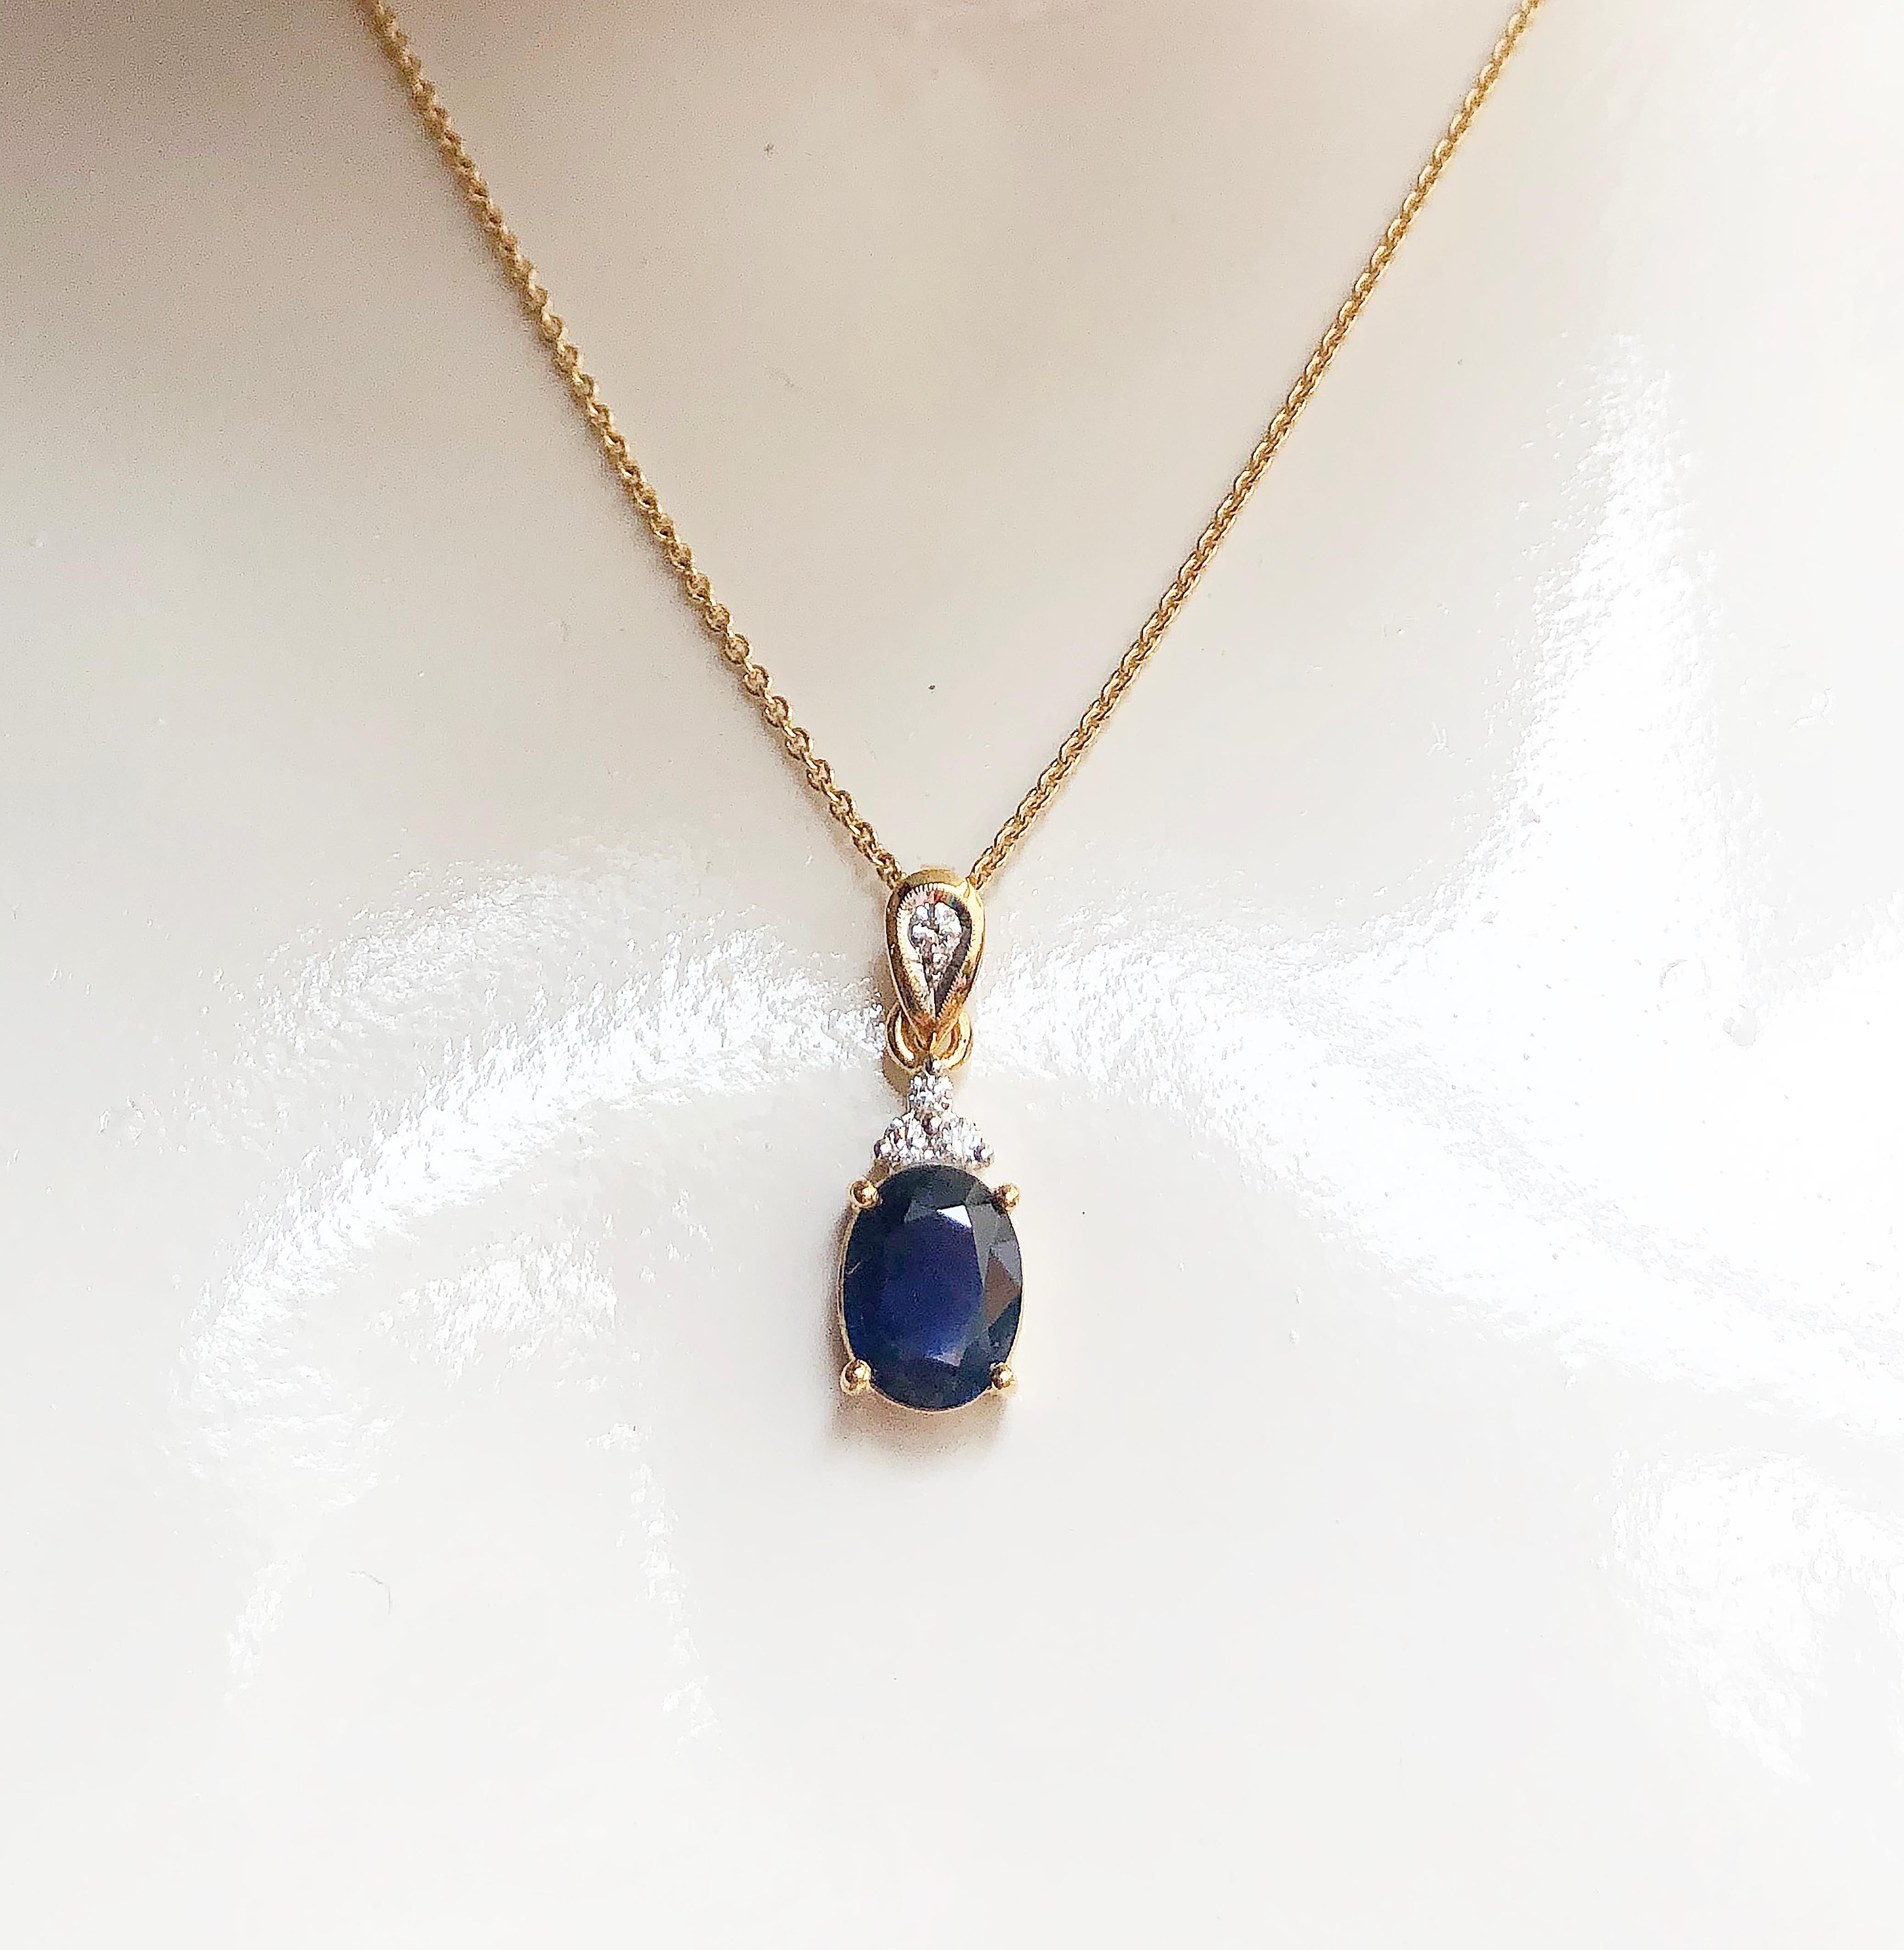 Blue Sapphire 2.39 carats with Diamond 0.13 carat Pendant set in 18 Karat Gold Settings
(chain not included)

Width:  0.8 cm 
Length: 2.2 cm
Total Weight: 2.94 grams

